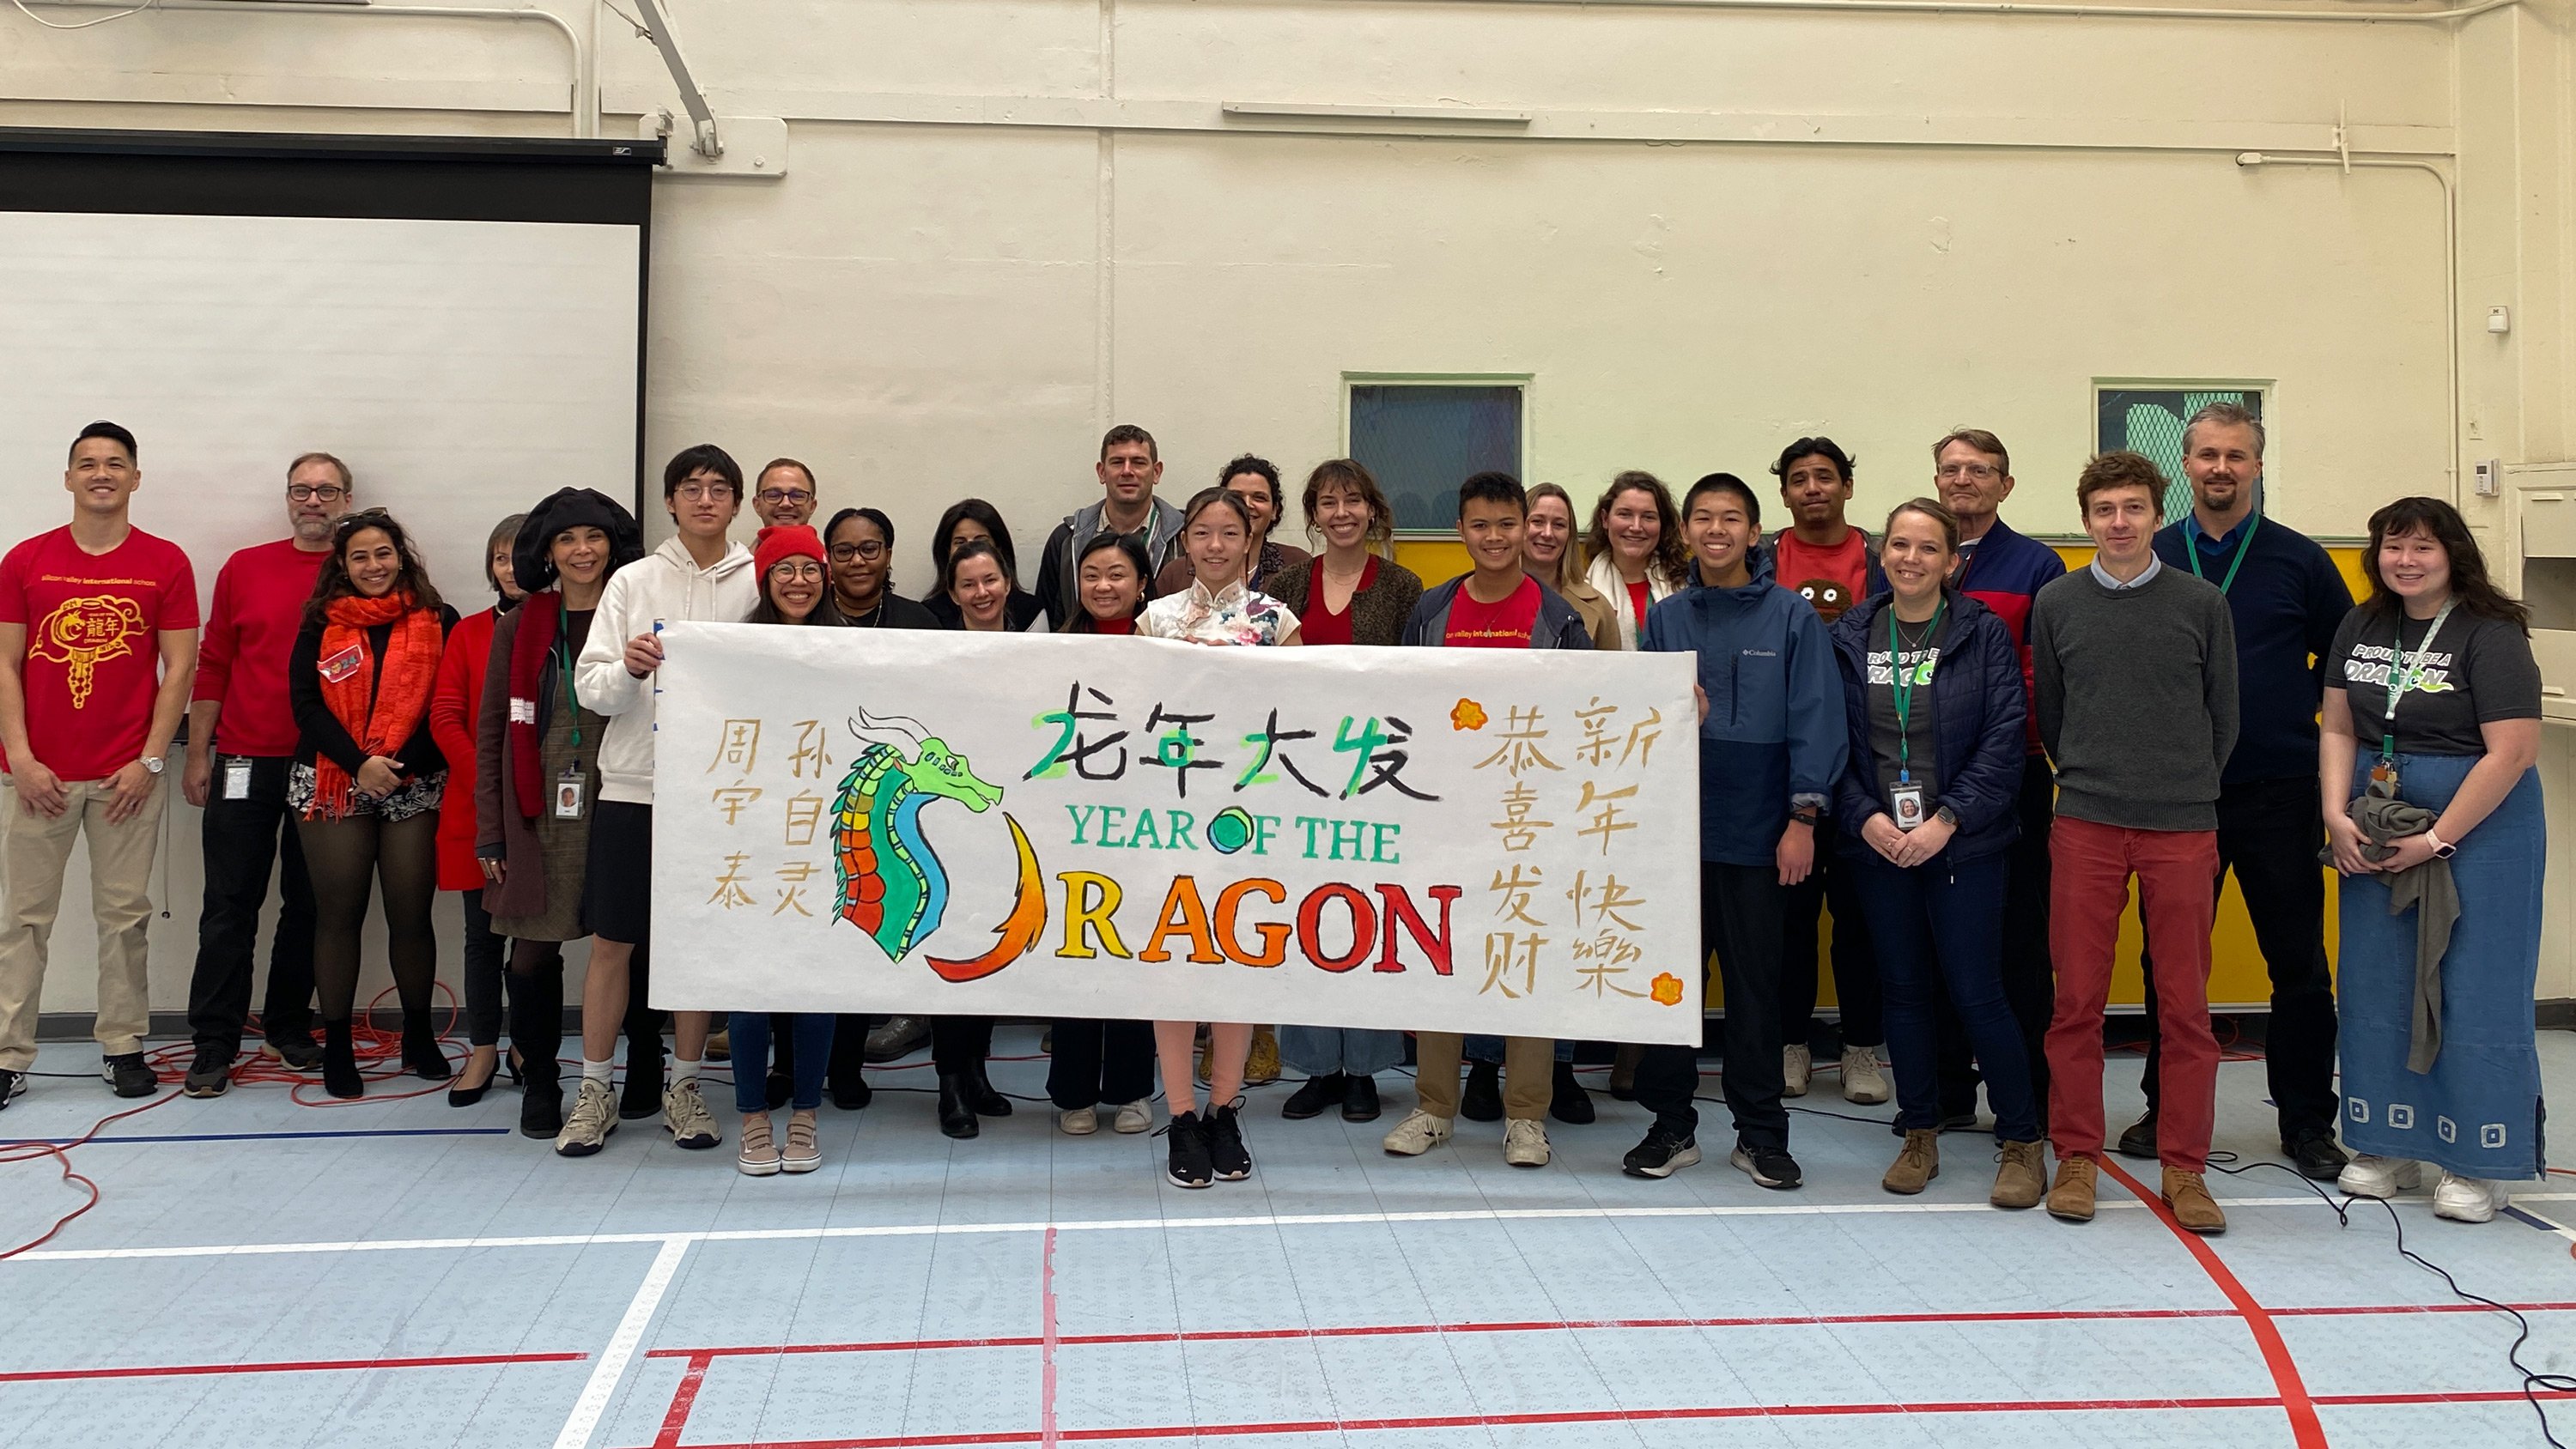 Upper School assembly with their hand painted Year of the Dragon banner.